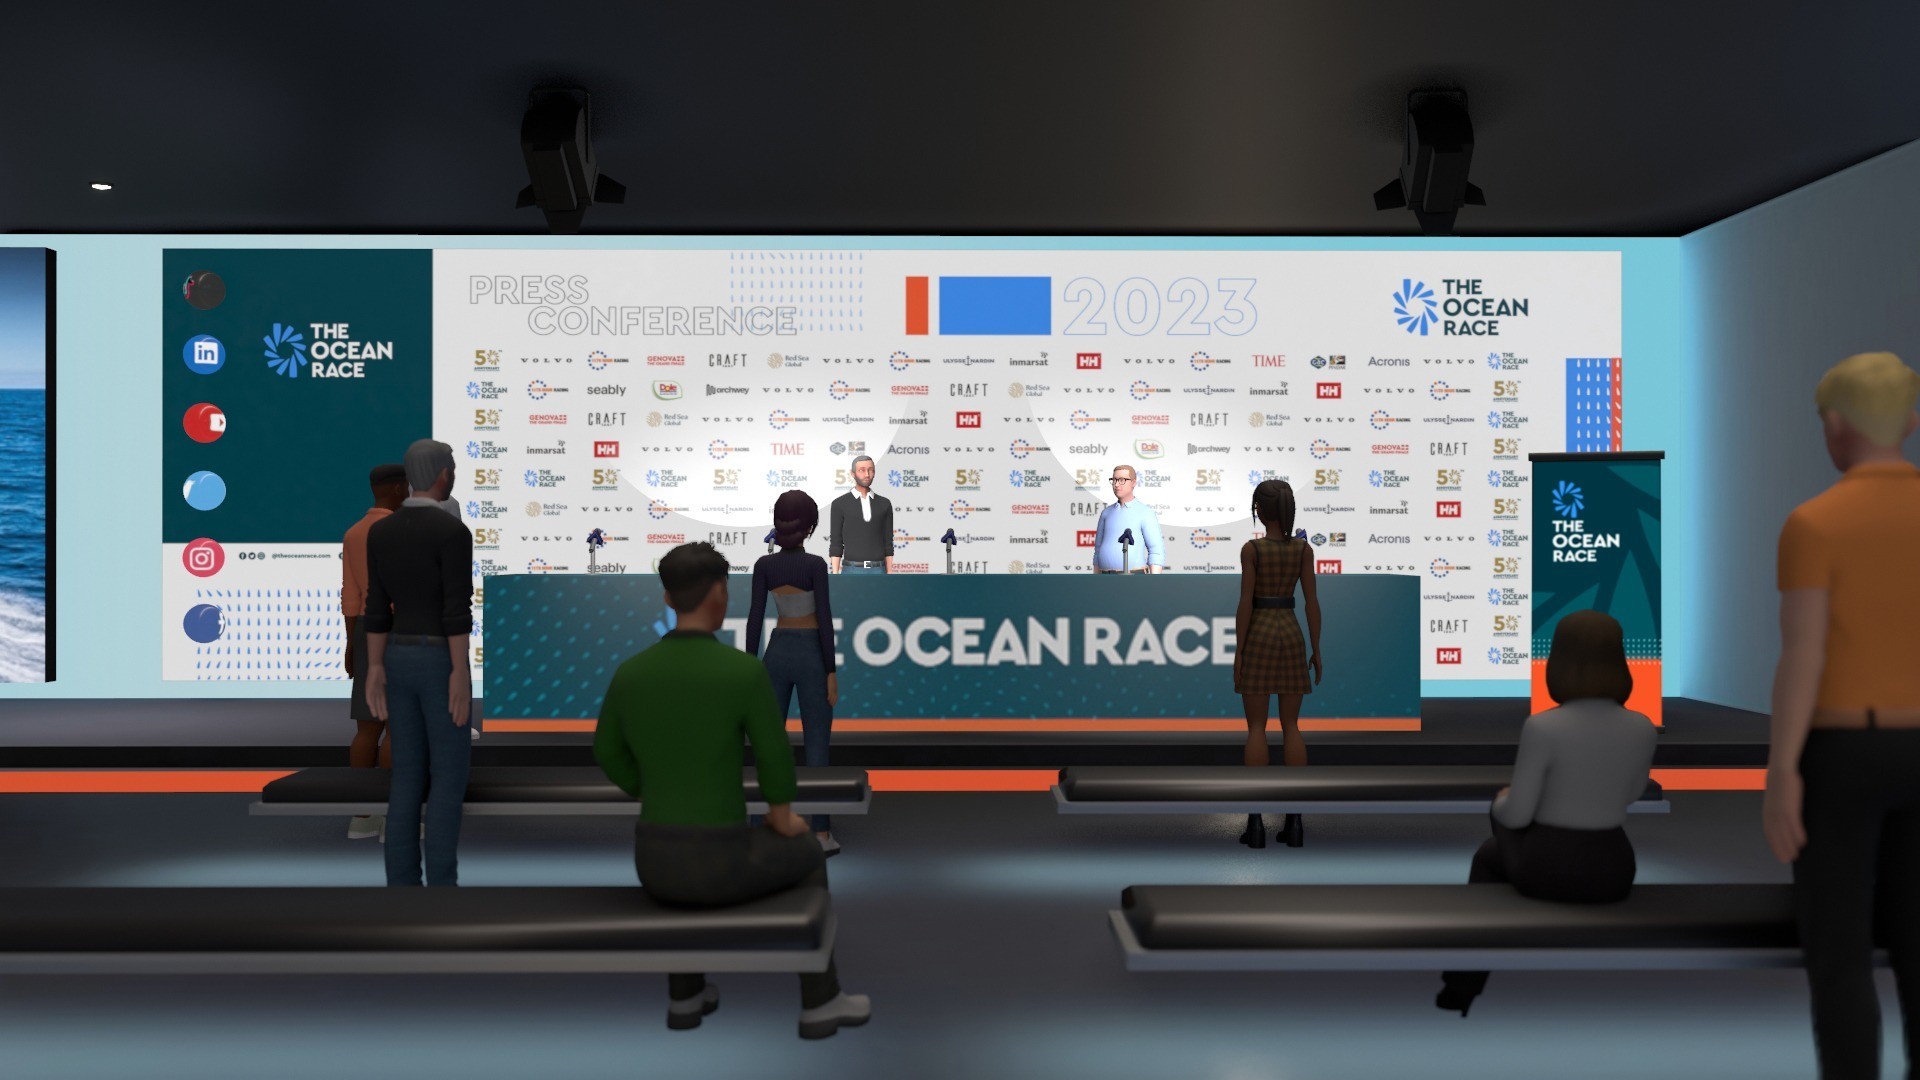 The Ocean Race 2022-23 - Metaverse - Press Conference Room © The Ocean Race